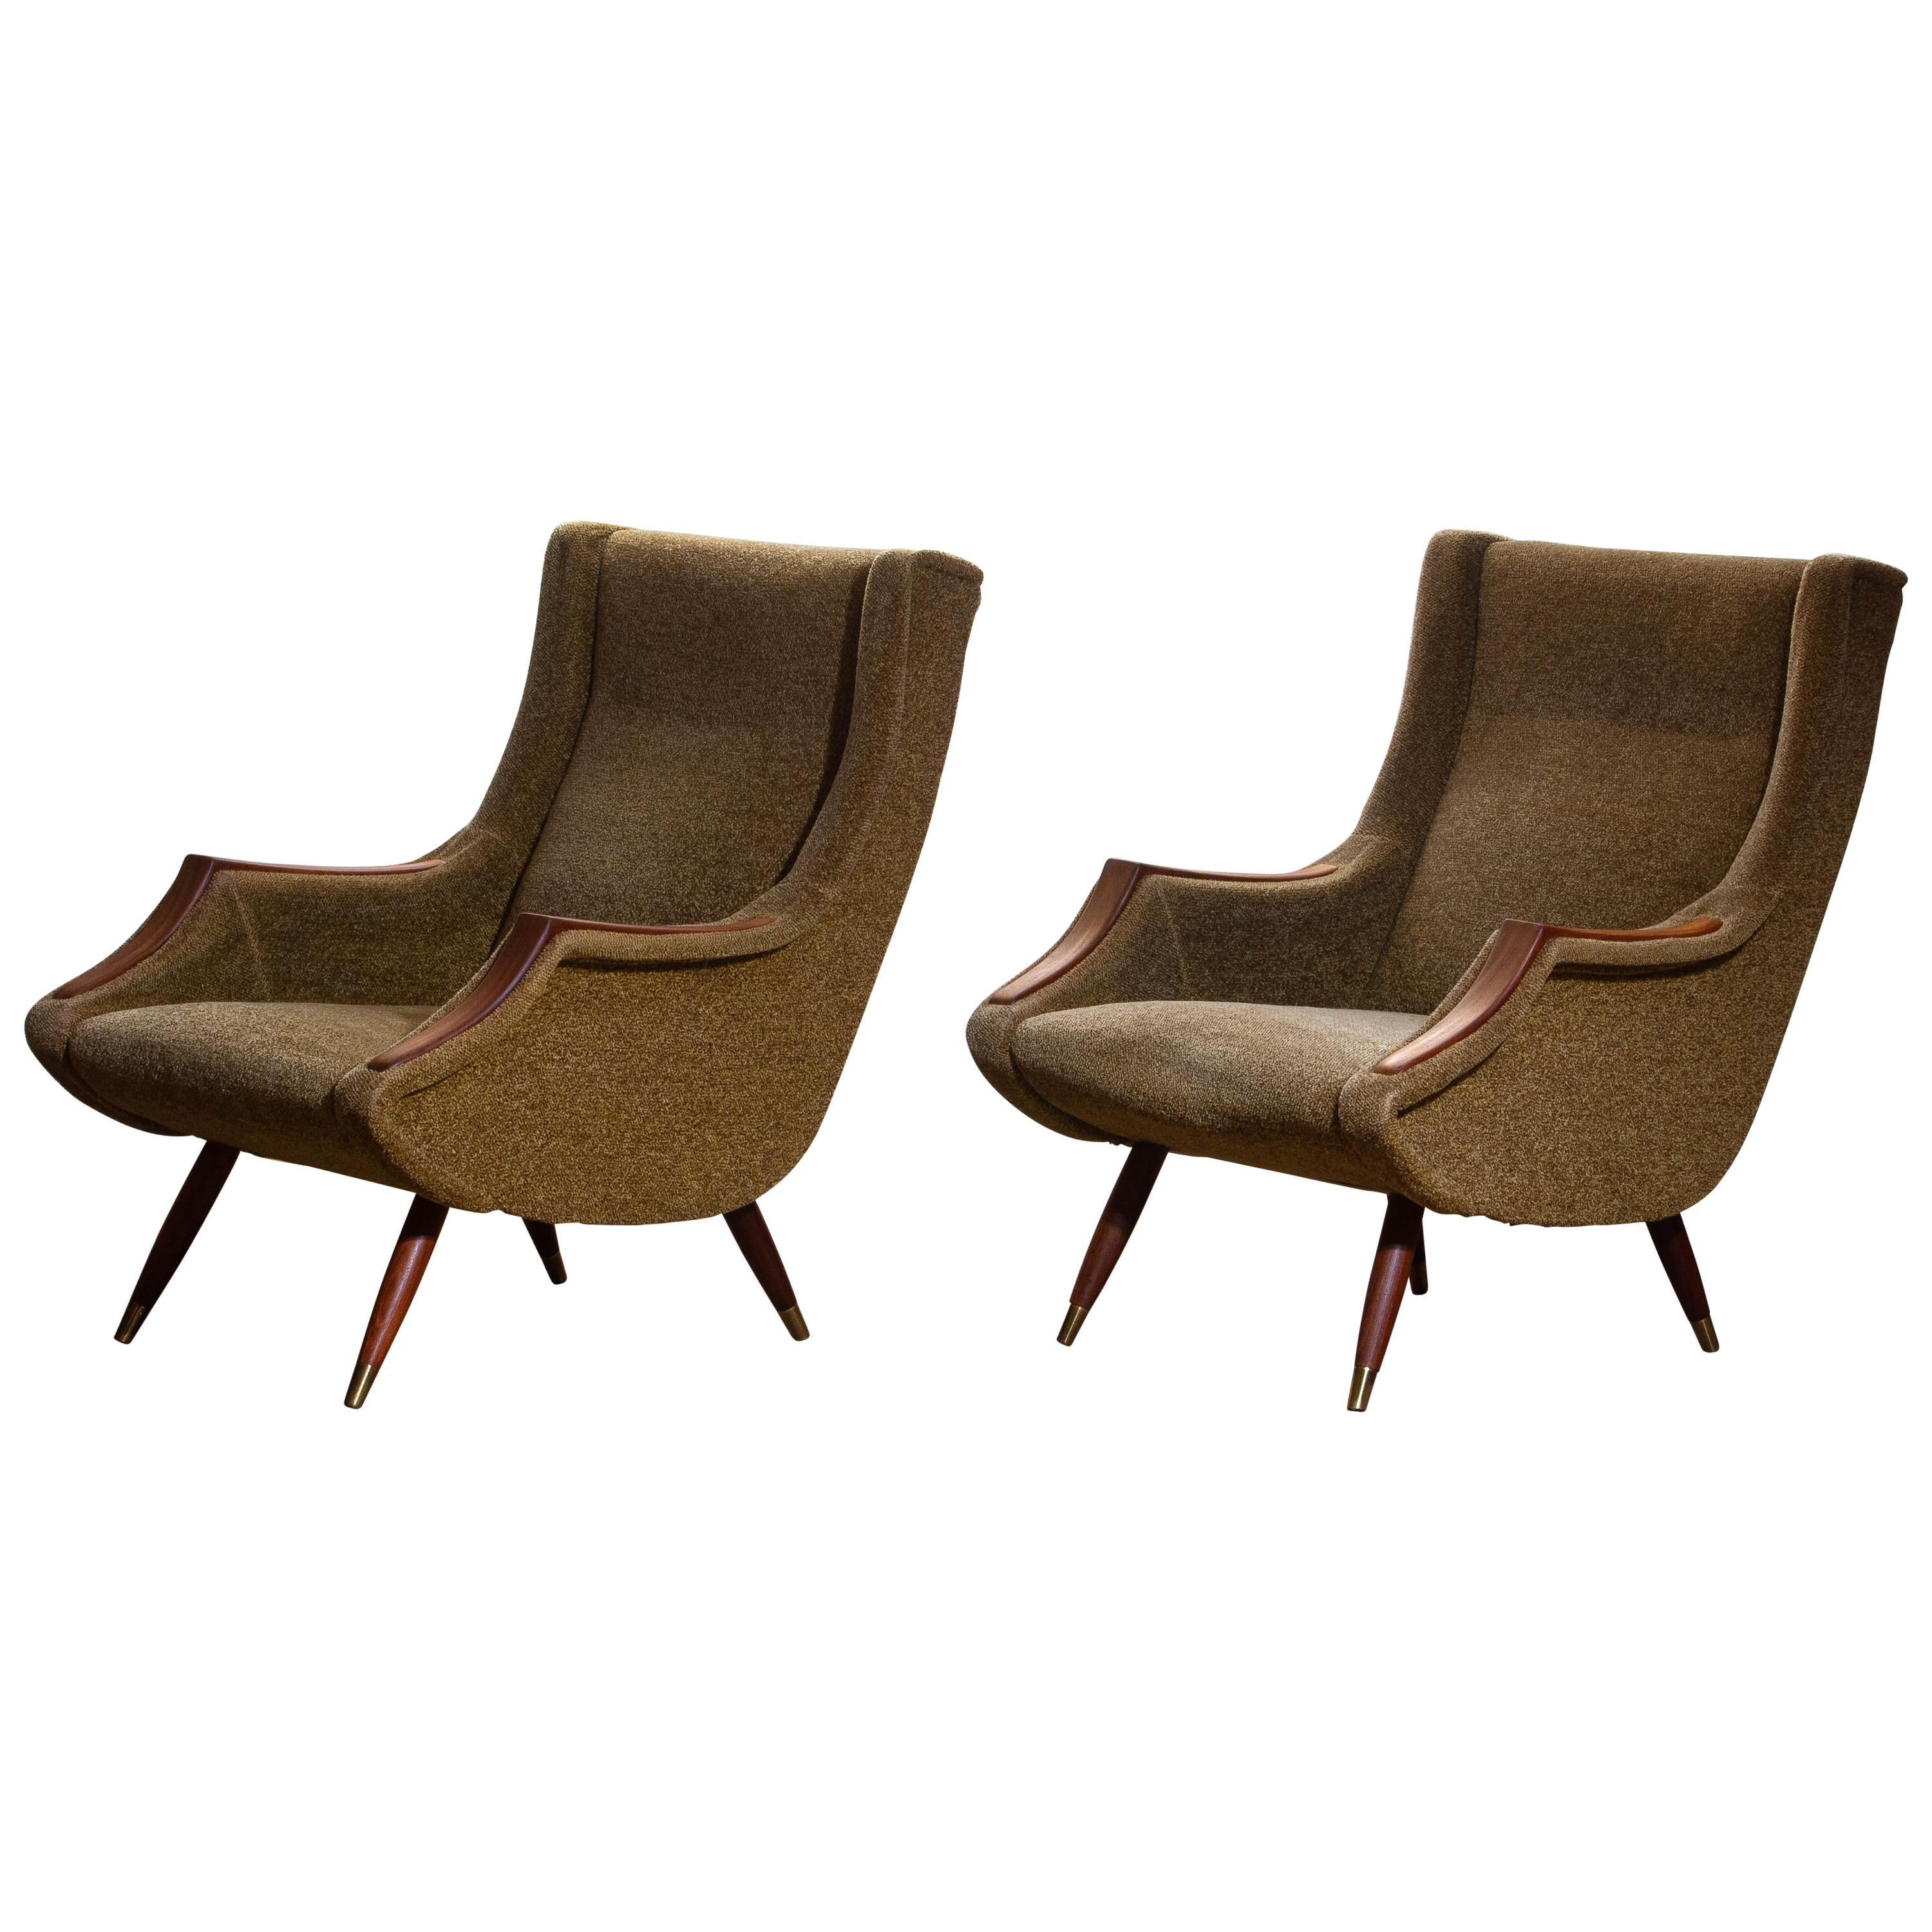 1950s, Set of Lounge Easy Club Chairs by Aldo Morbelli for Isa Bergamo, Italy In Good Condition In Silvolde, Gelderland